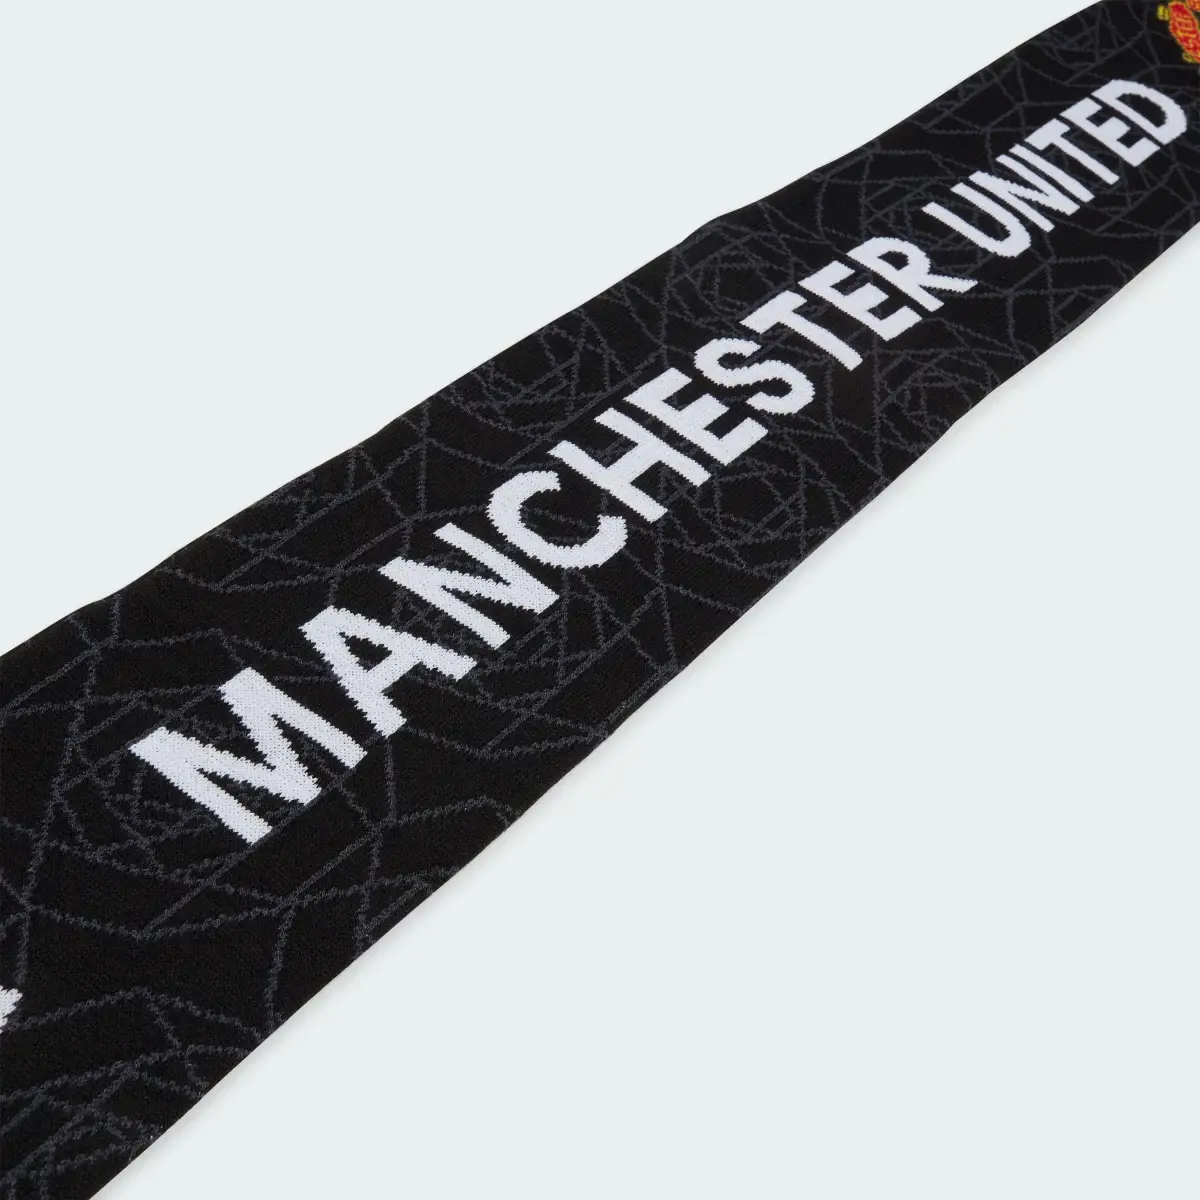 Adidas Manchester United Home Scarf. 3